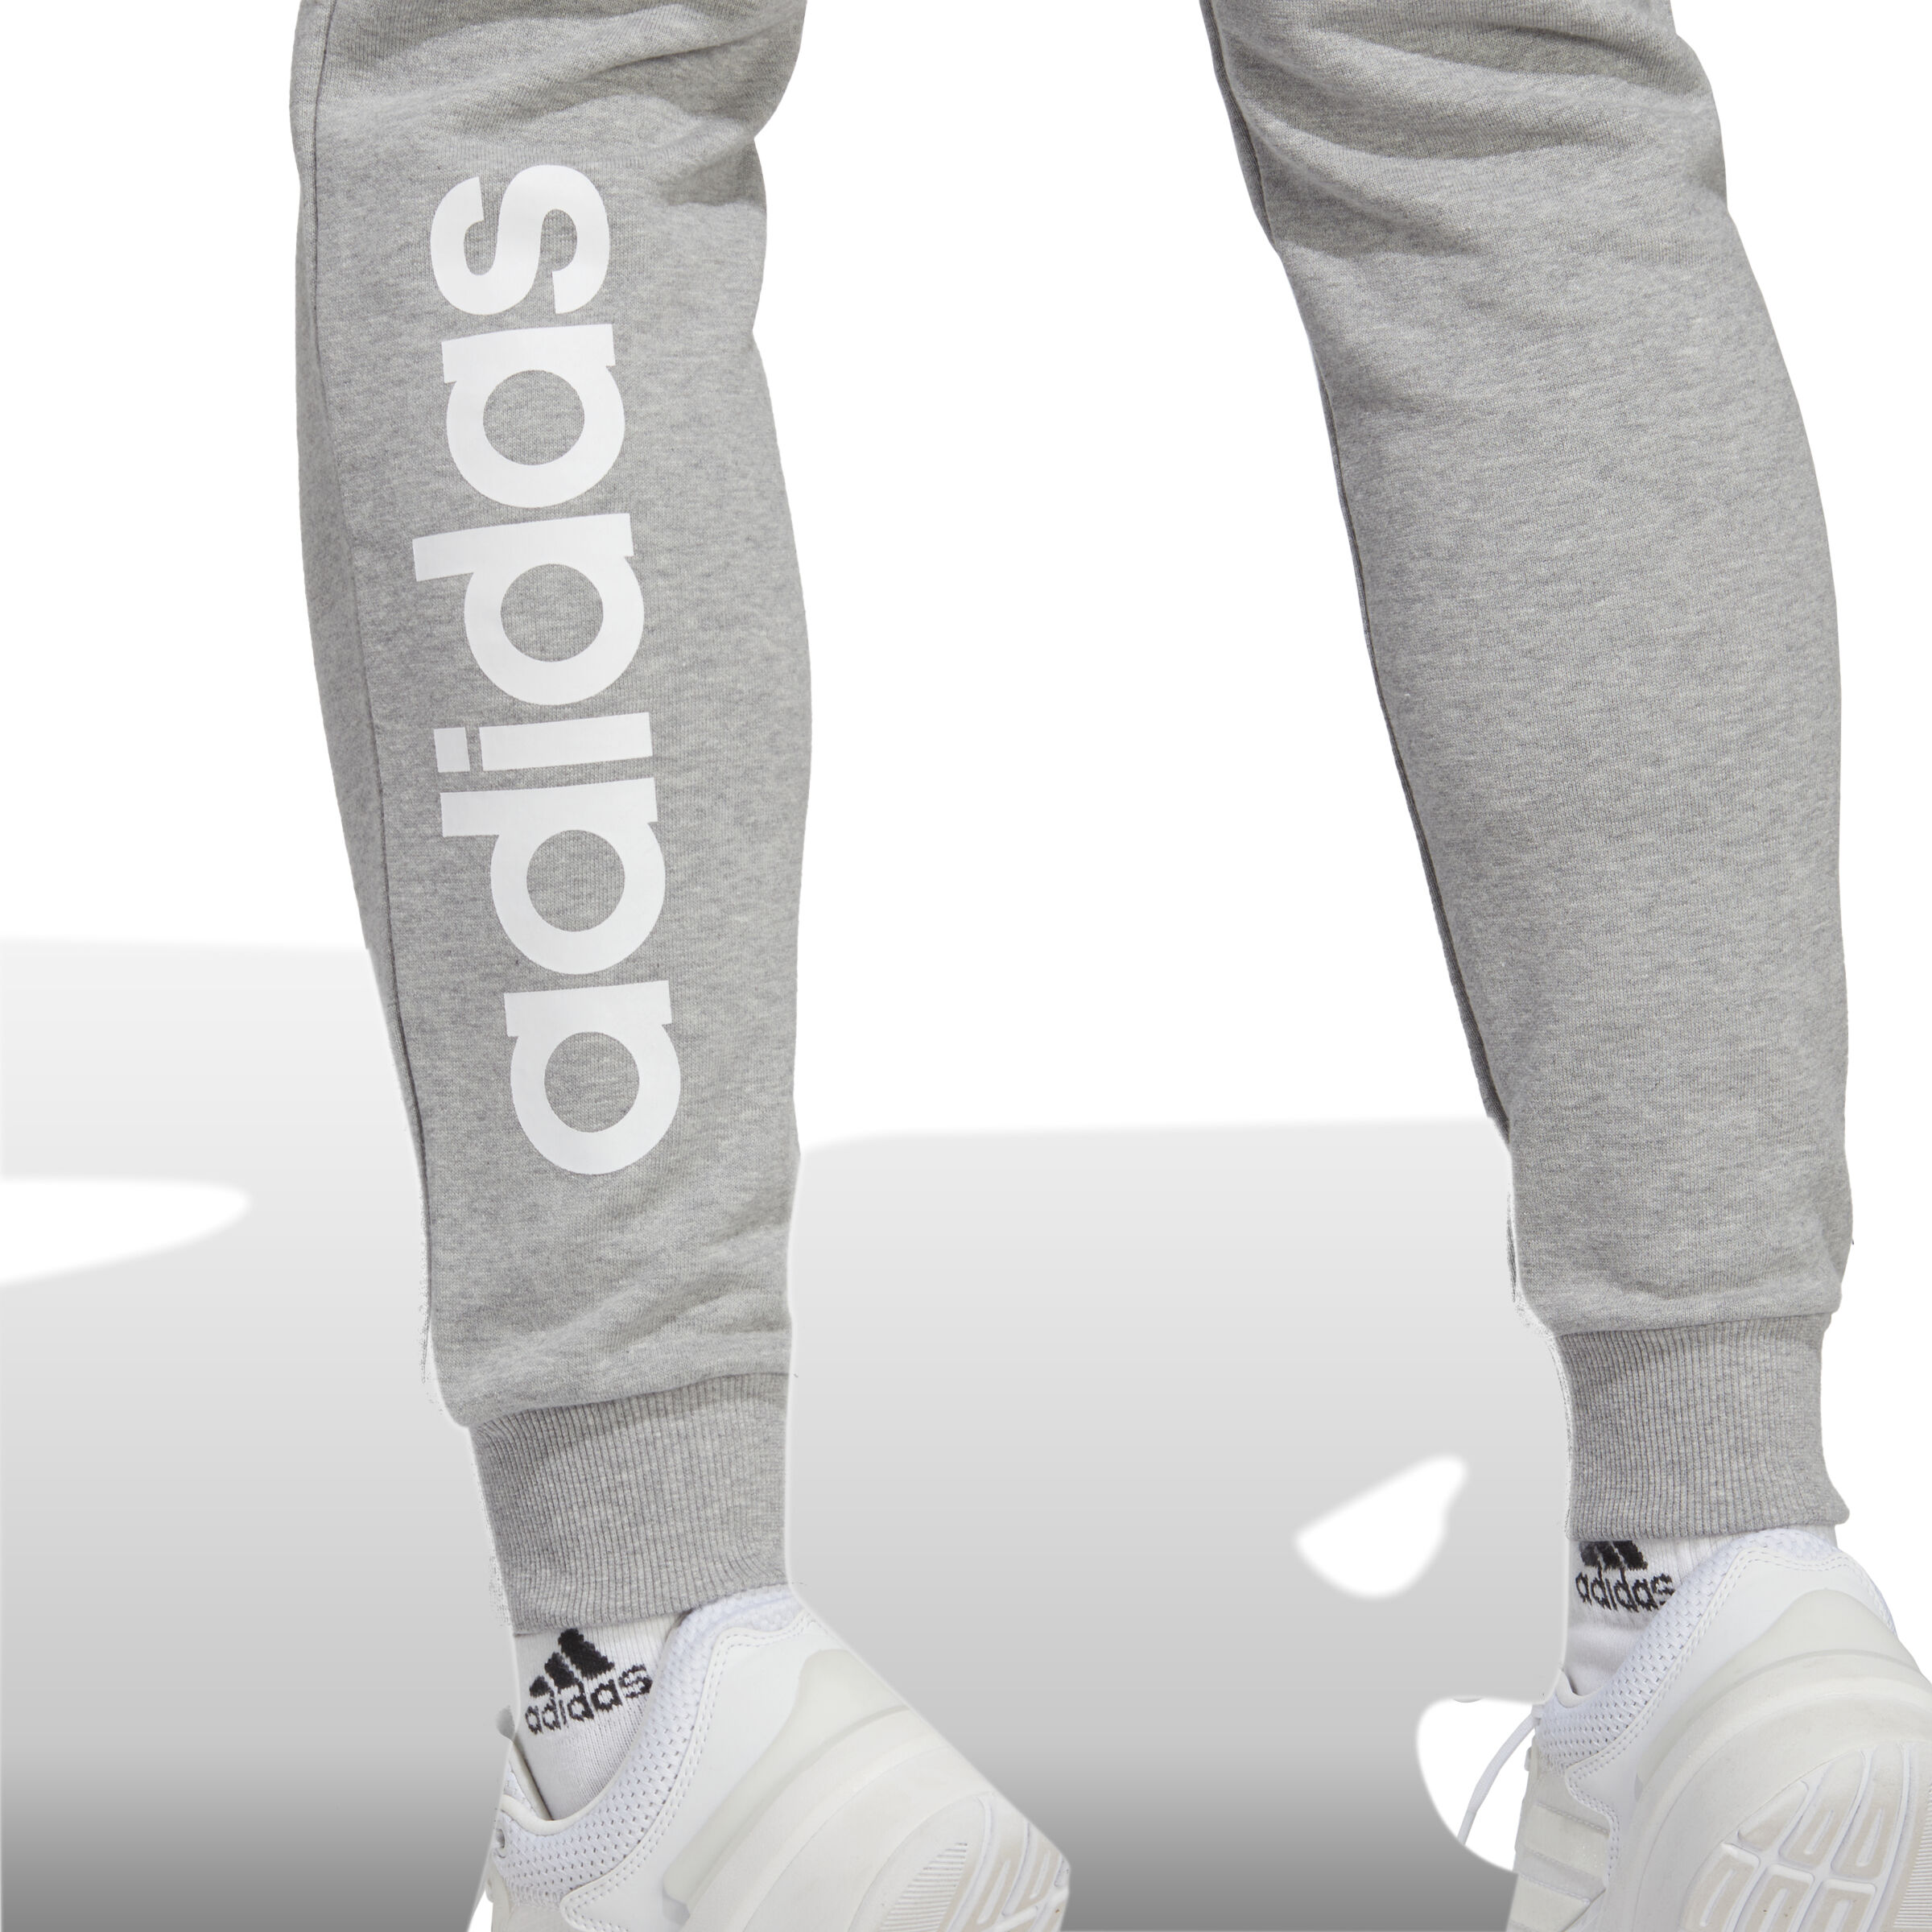 Buy Boys joggers Blue at Best Price | Adidas kids